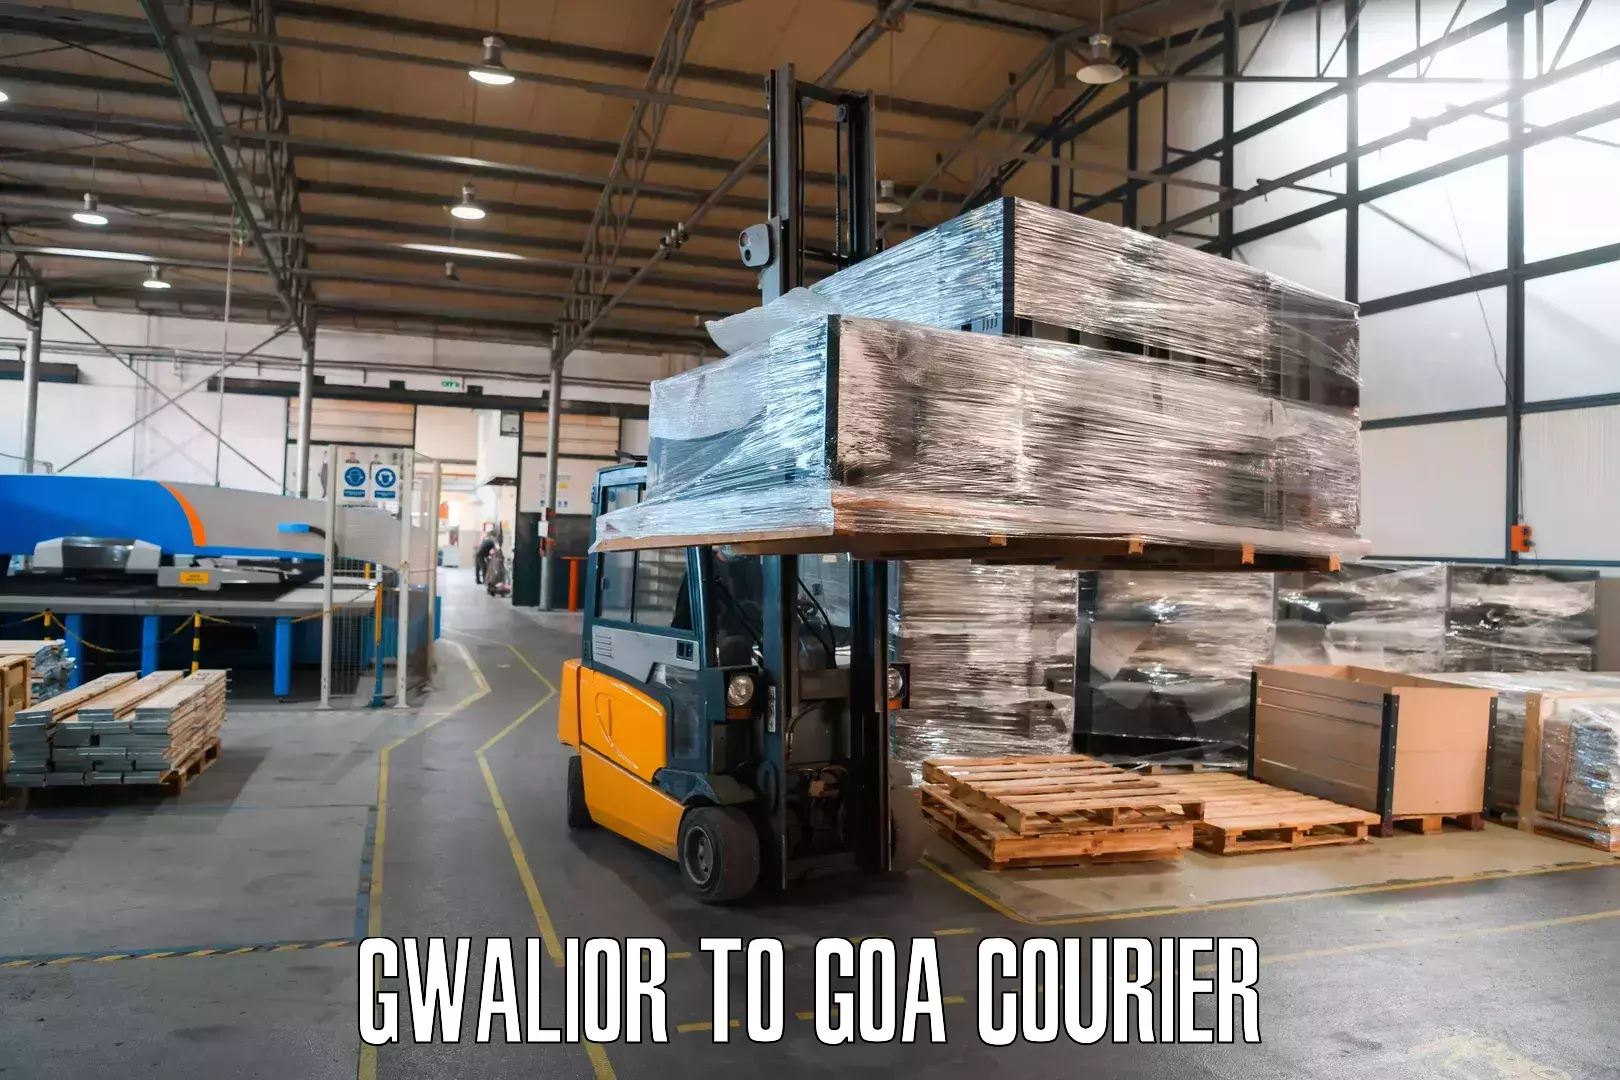 Package delivery network Gwalior to Panaji